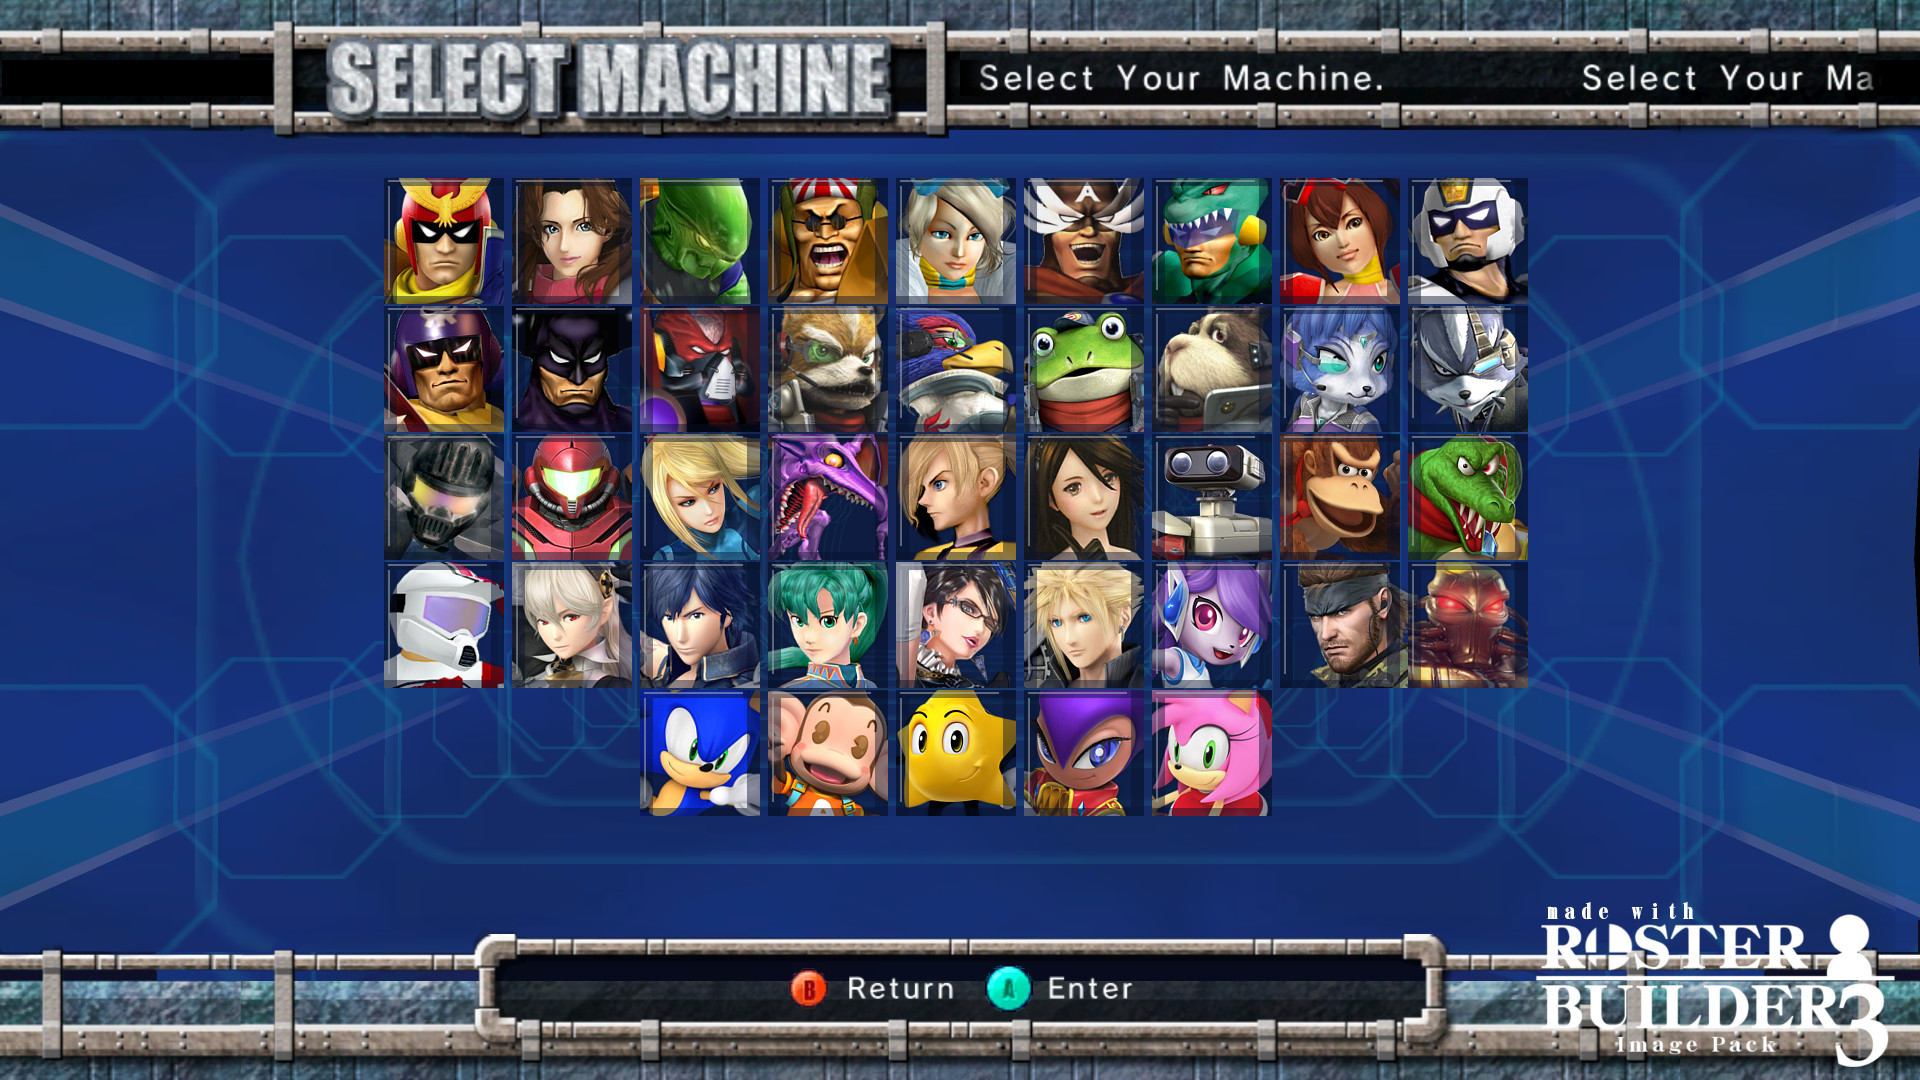 1920x1080 ... Roster Builder 3 Sample - F-Zero GX Style by ConnorRentz